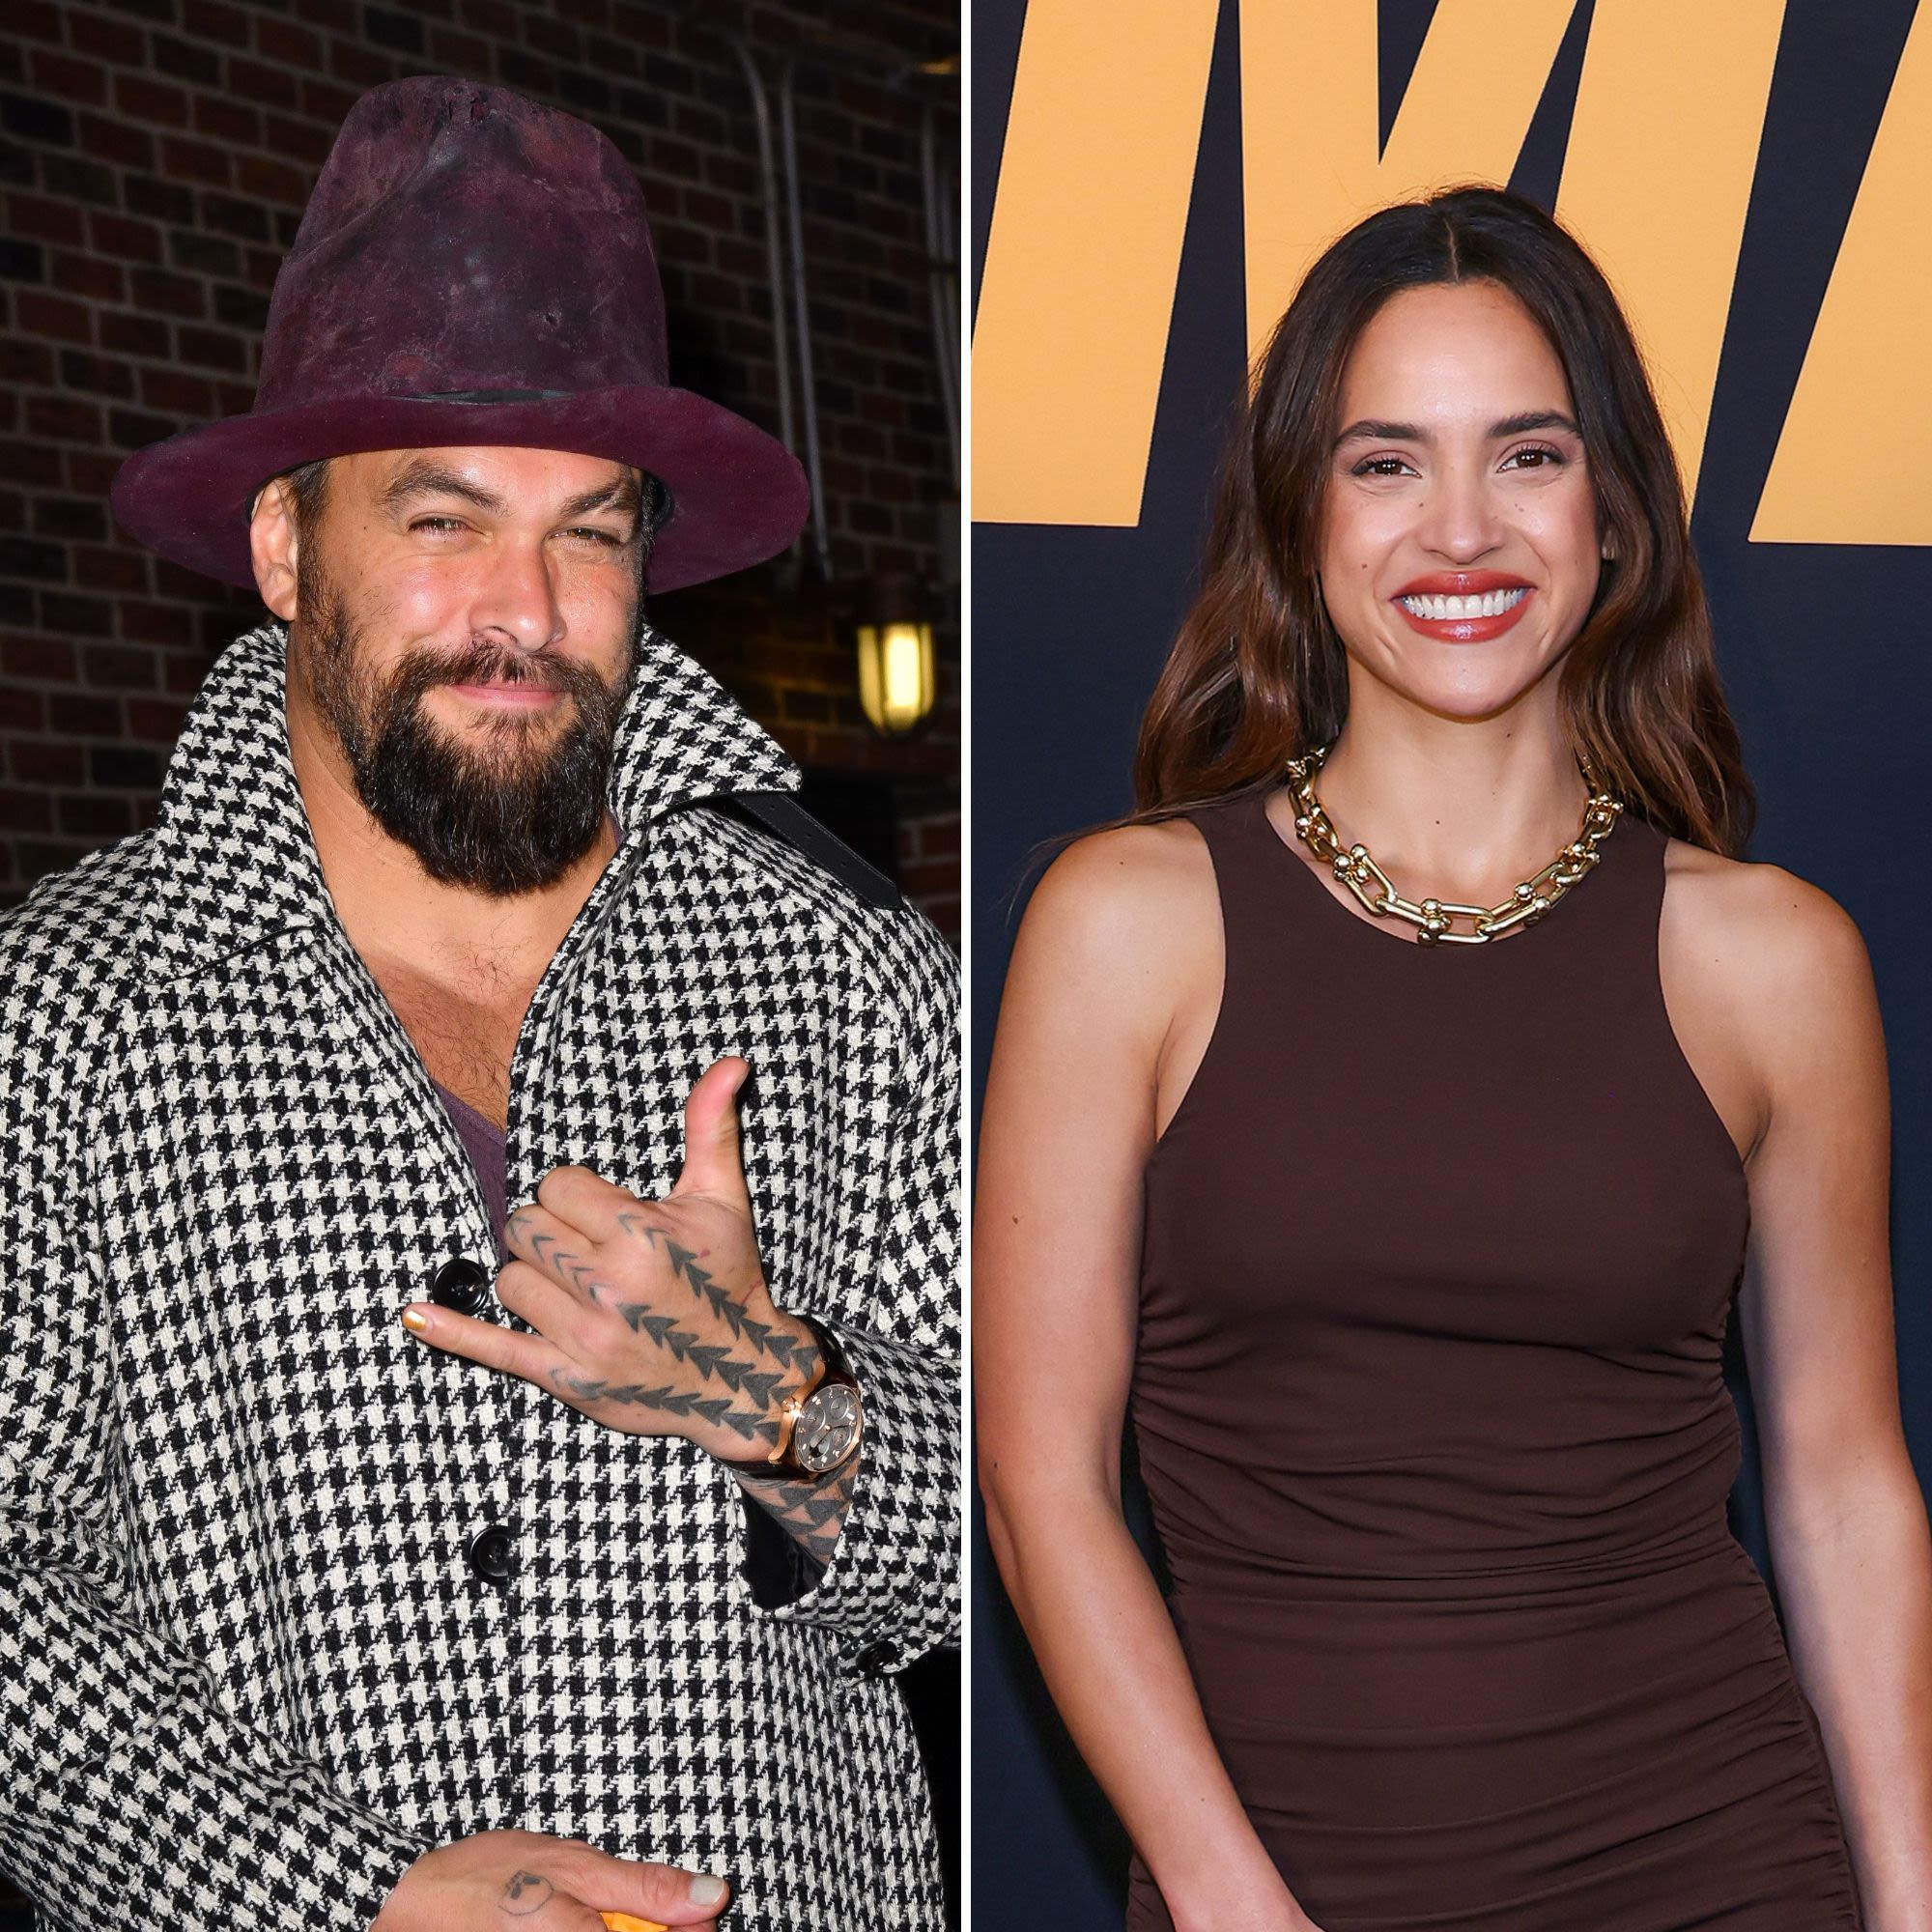 Jason Momoa’s New Girlfriend Adria Arjona Finalized Divorce Months Before Going Public With ‘Aquaman’ Star